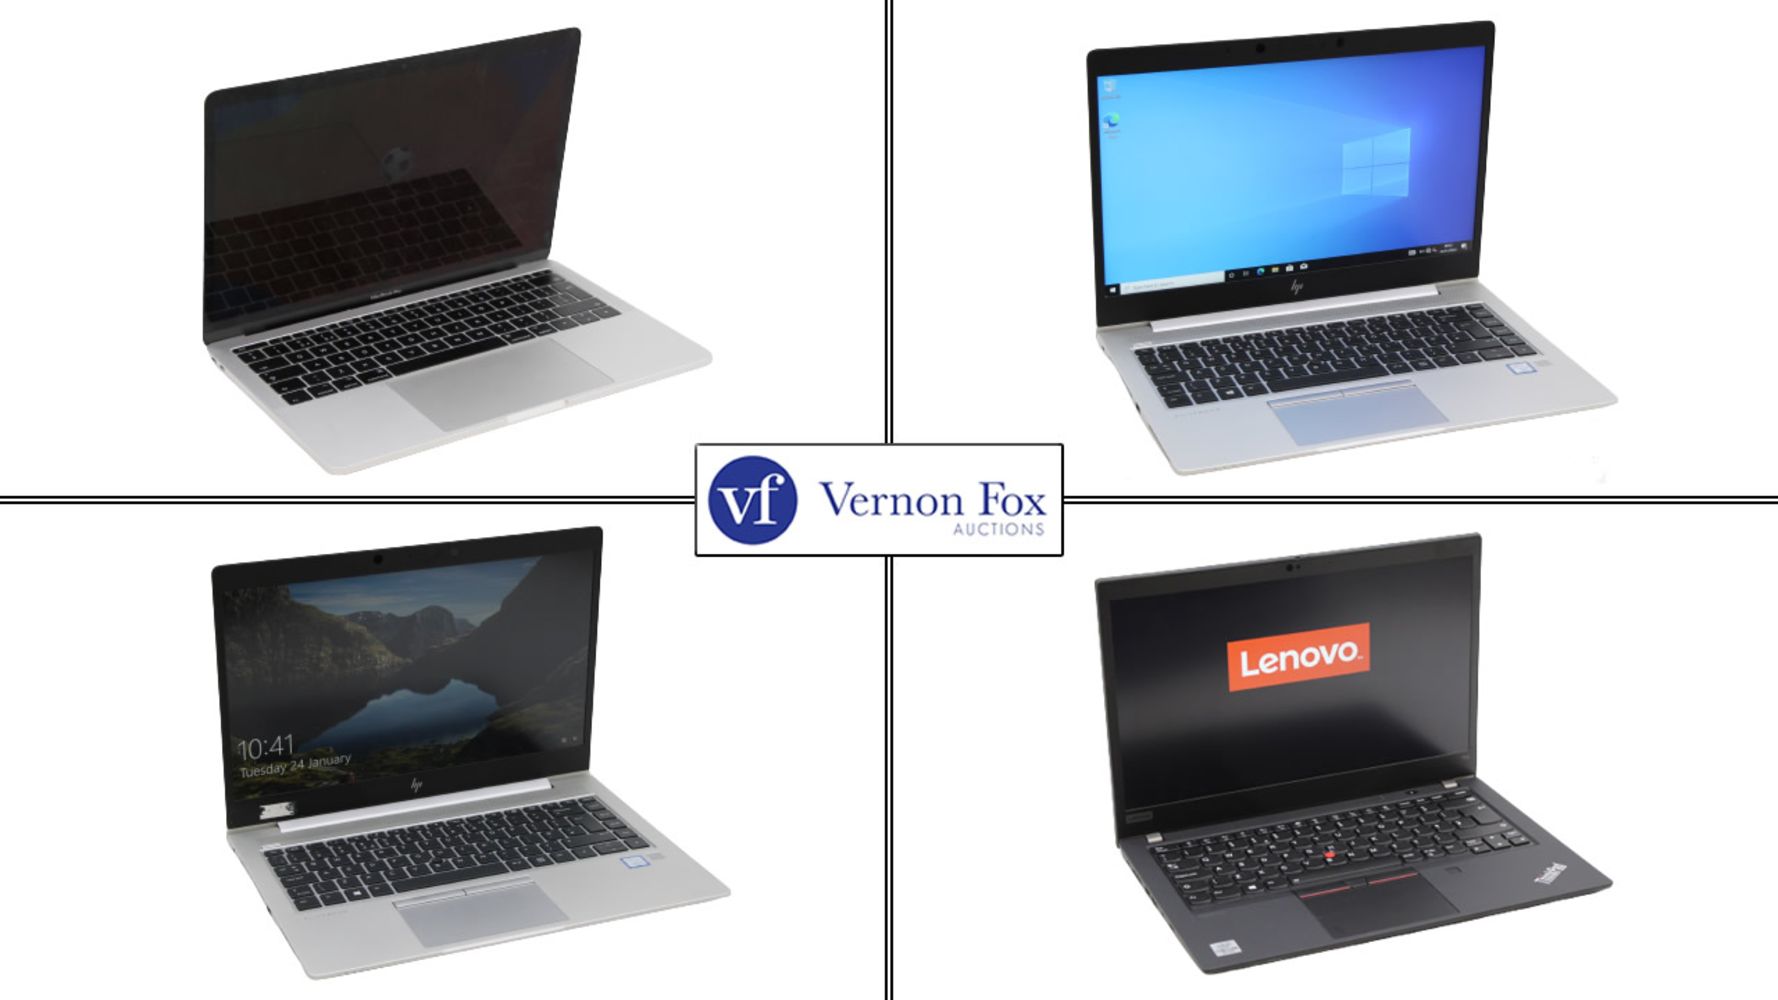 TIMED ONLINE AUCTION: The Laptop Sale, featuring Used and Refurbished MacBooks, PC Laptops and Chromebooks, with FREE UK DELIVERY!